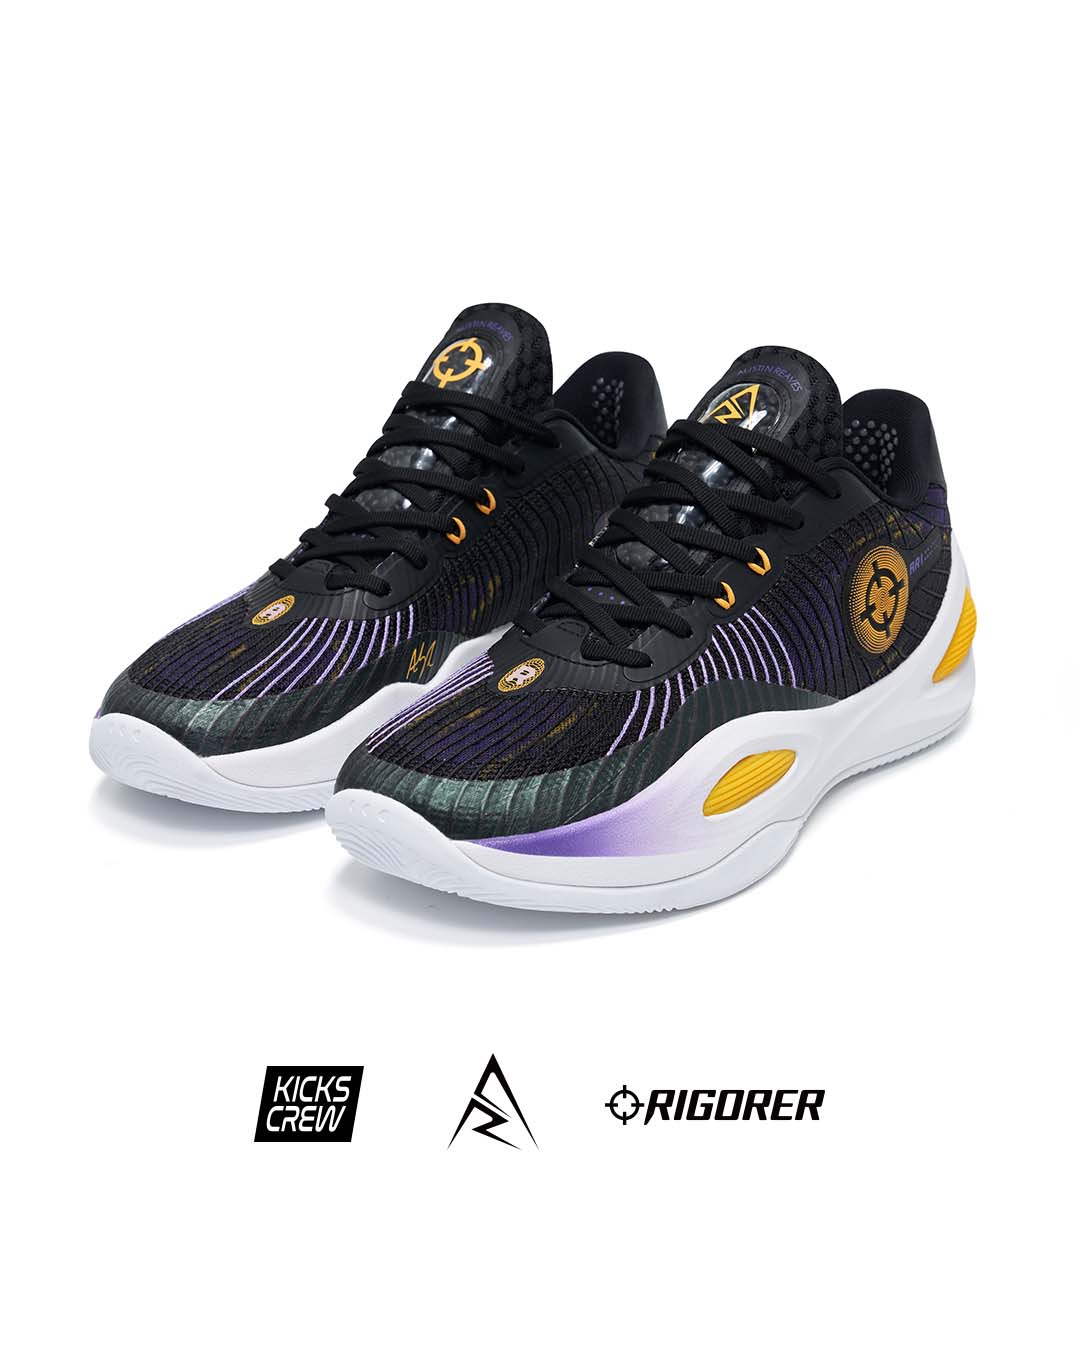 Lakers Guard Austin Reaves' First Sneaker Release Information